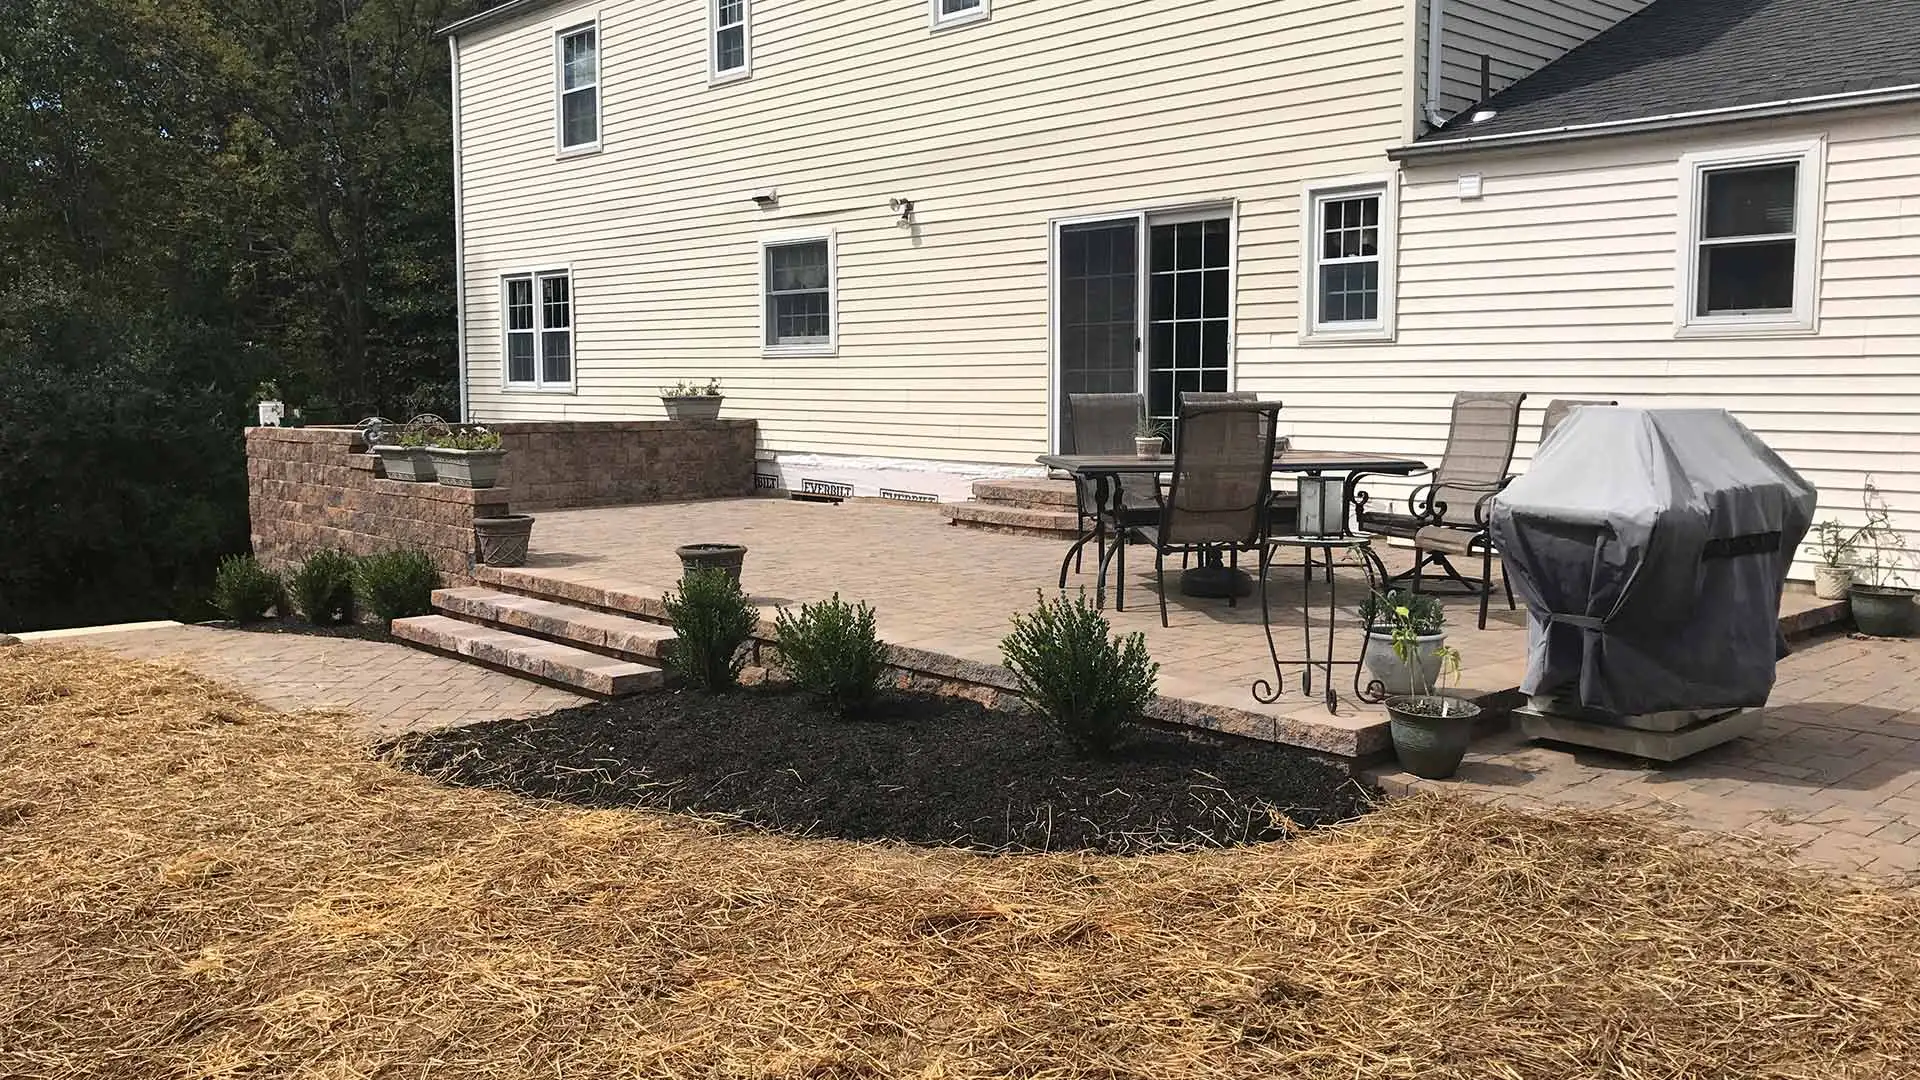 Landscaping and hardscapes done by Trevor's Landscaping in Hunterdon County, NJ.